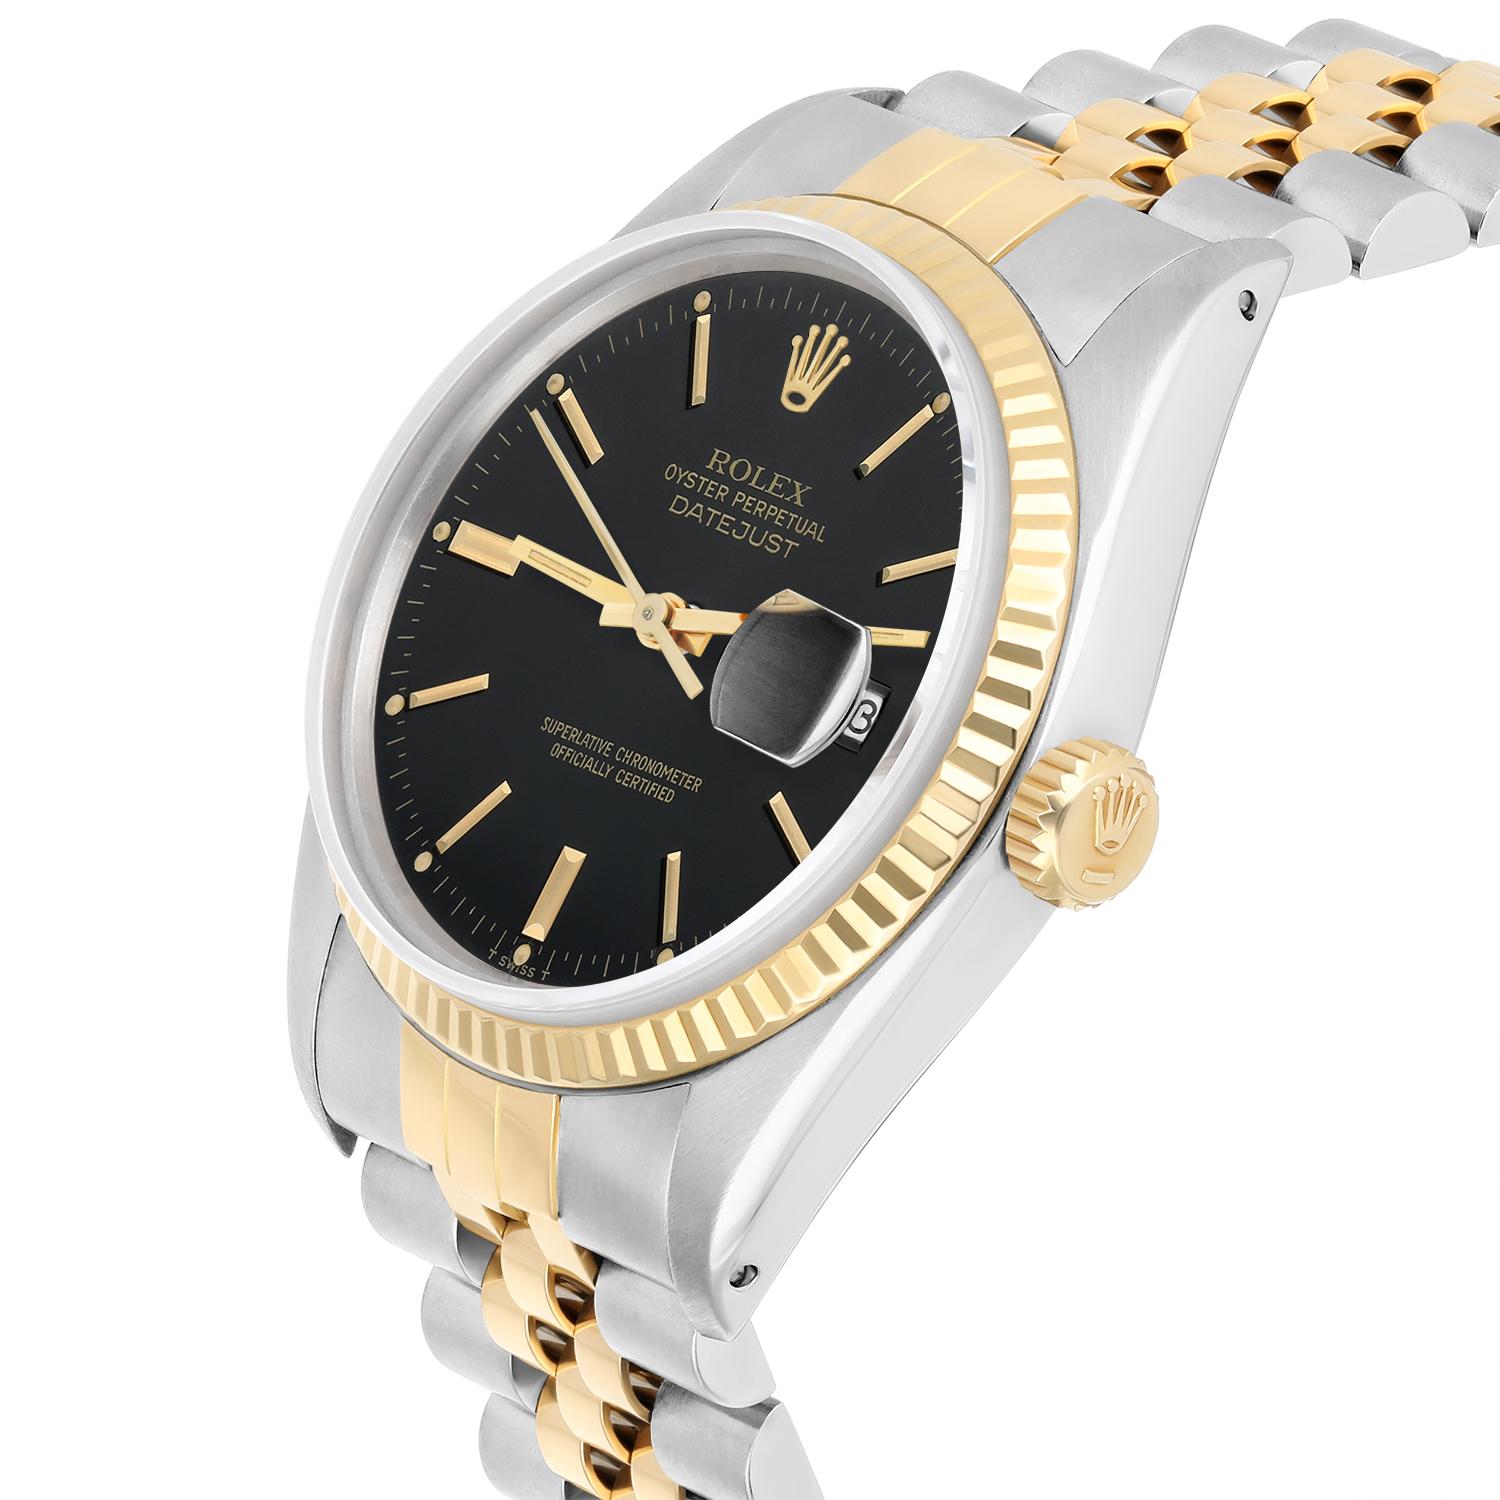 Rolex Datejust 36mm Two Tone Black lndex Dial Jubilee 16013 Circa 1987 Complete For Sale 1